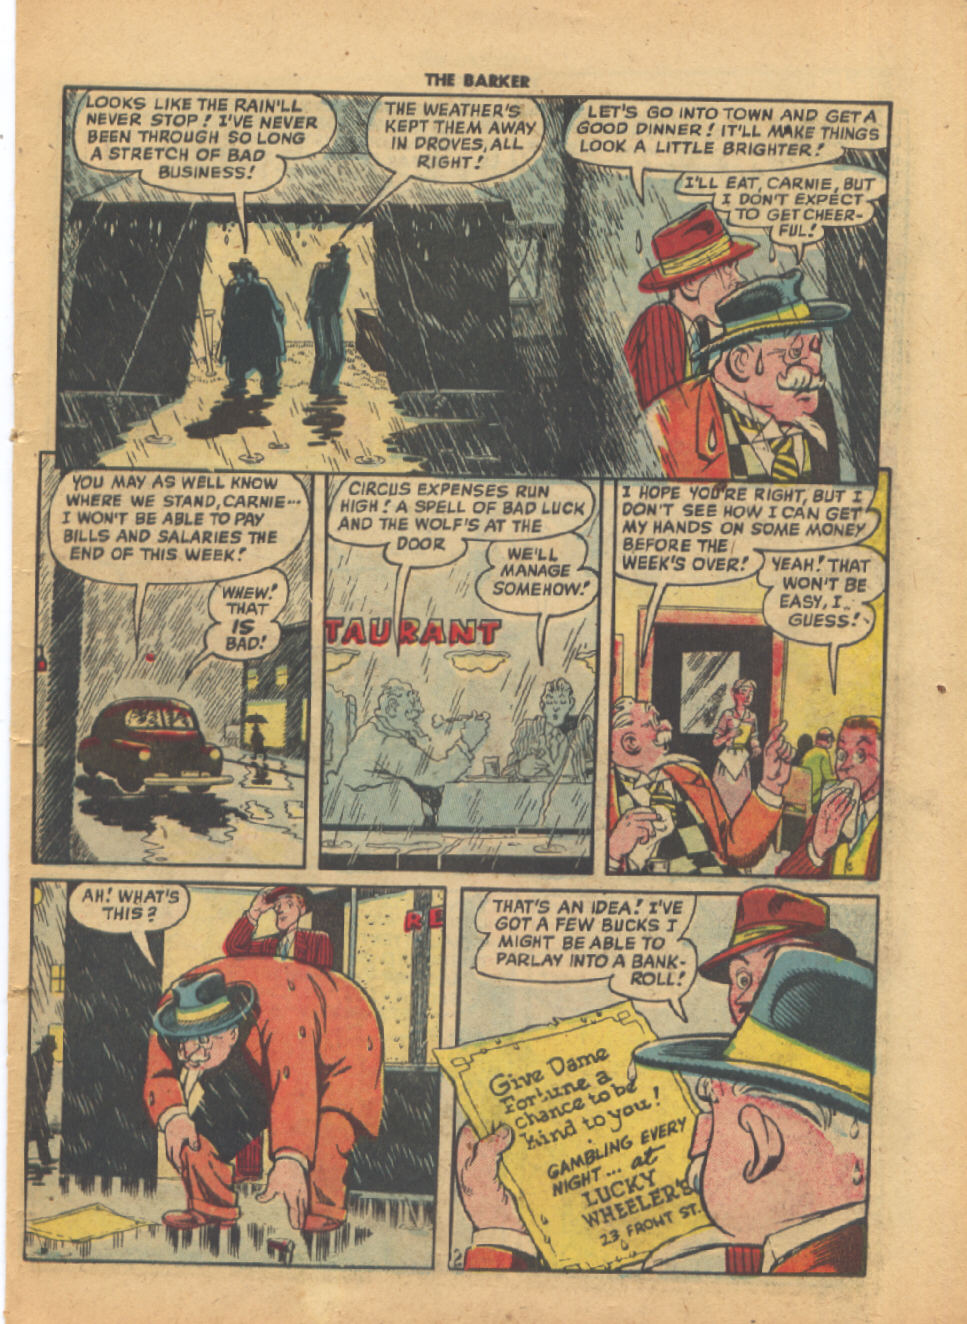 Read online Barker comic -  Issue #11 - 37